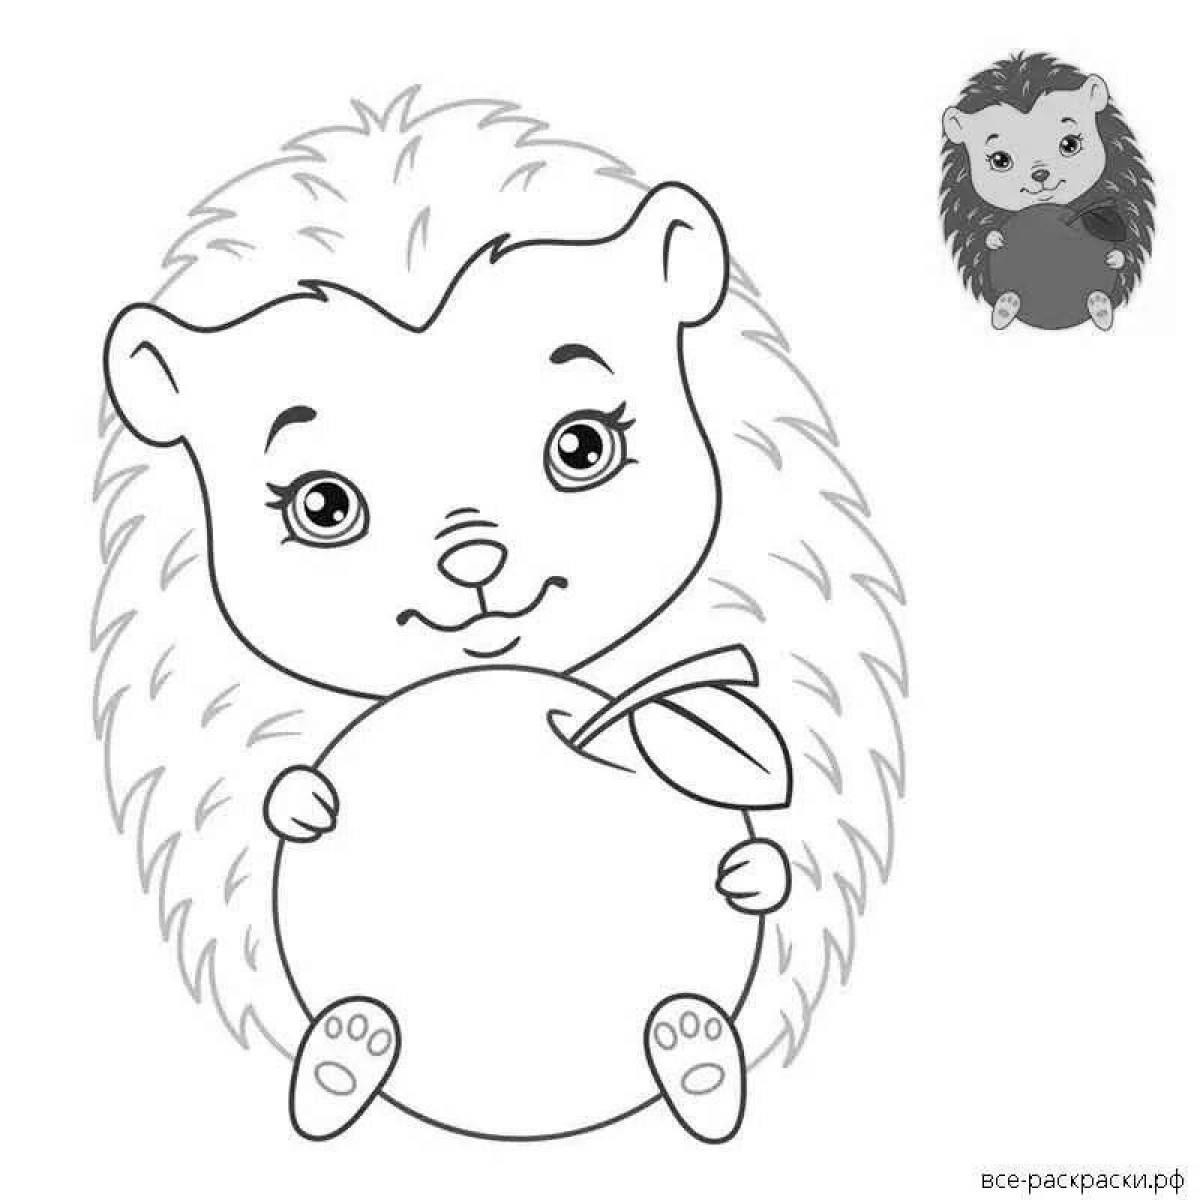 Cute and quirky hedgehog coloring page